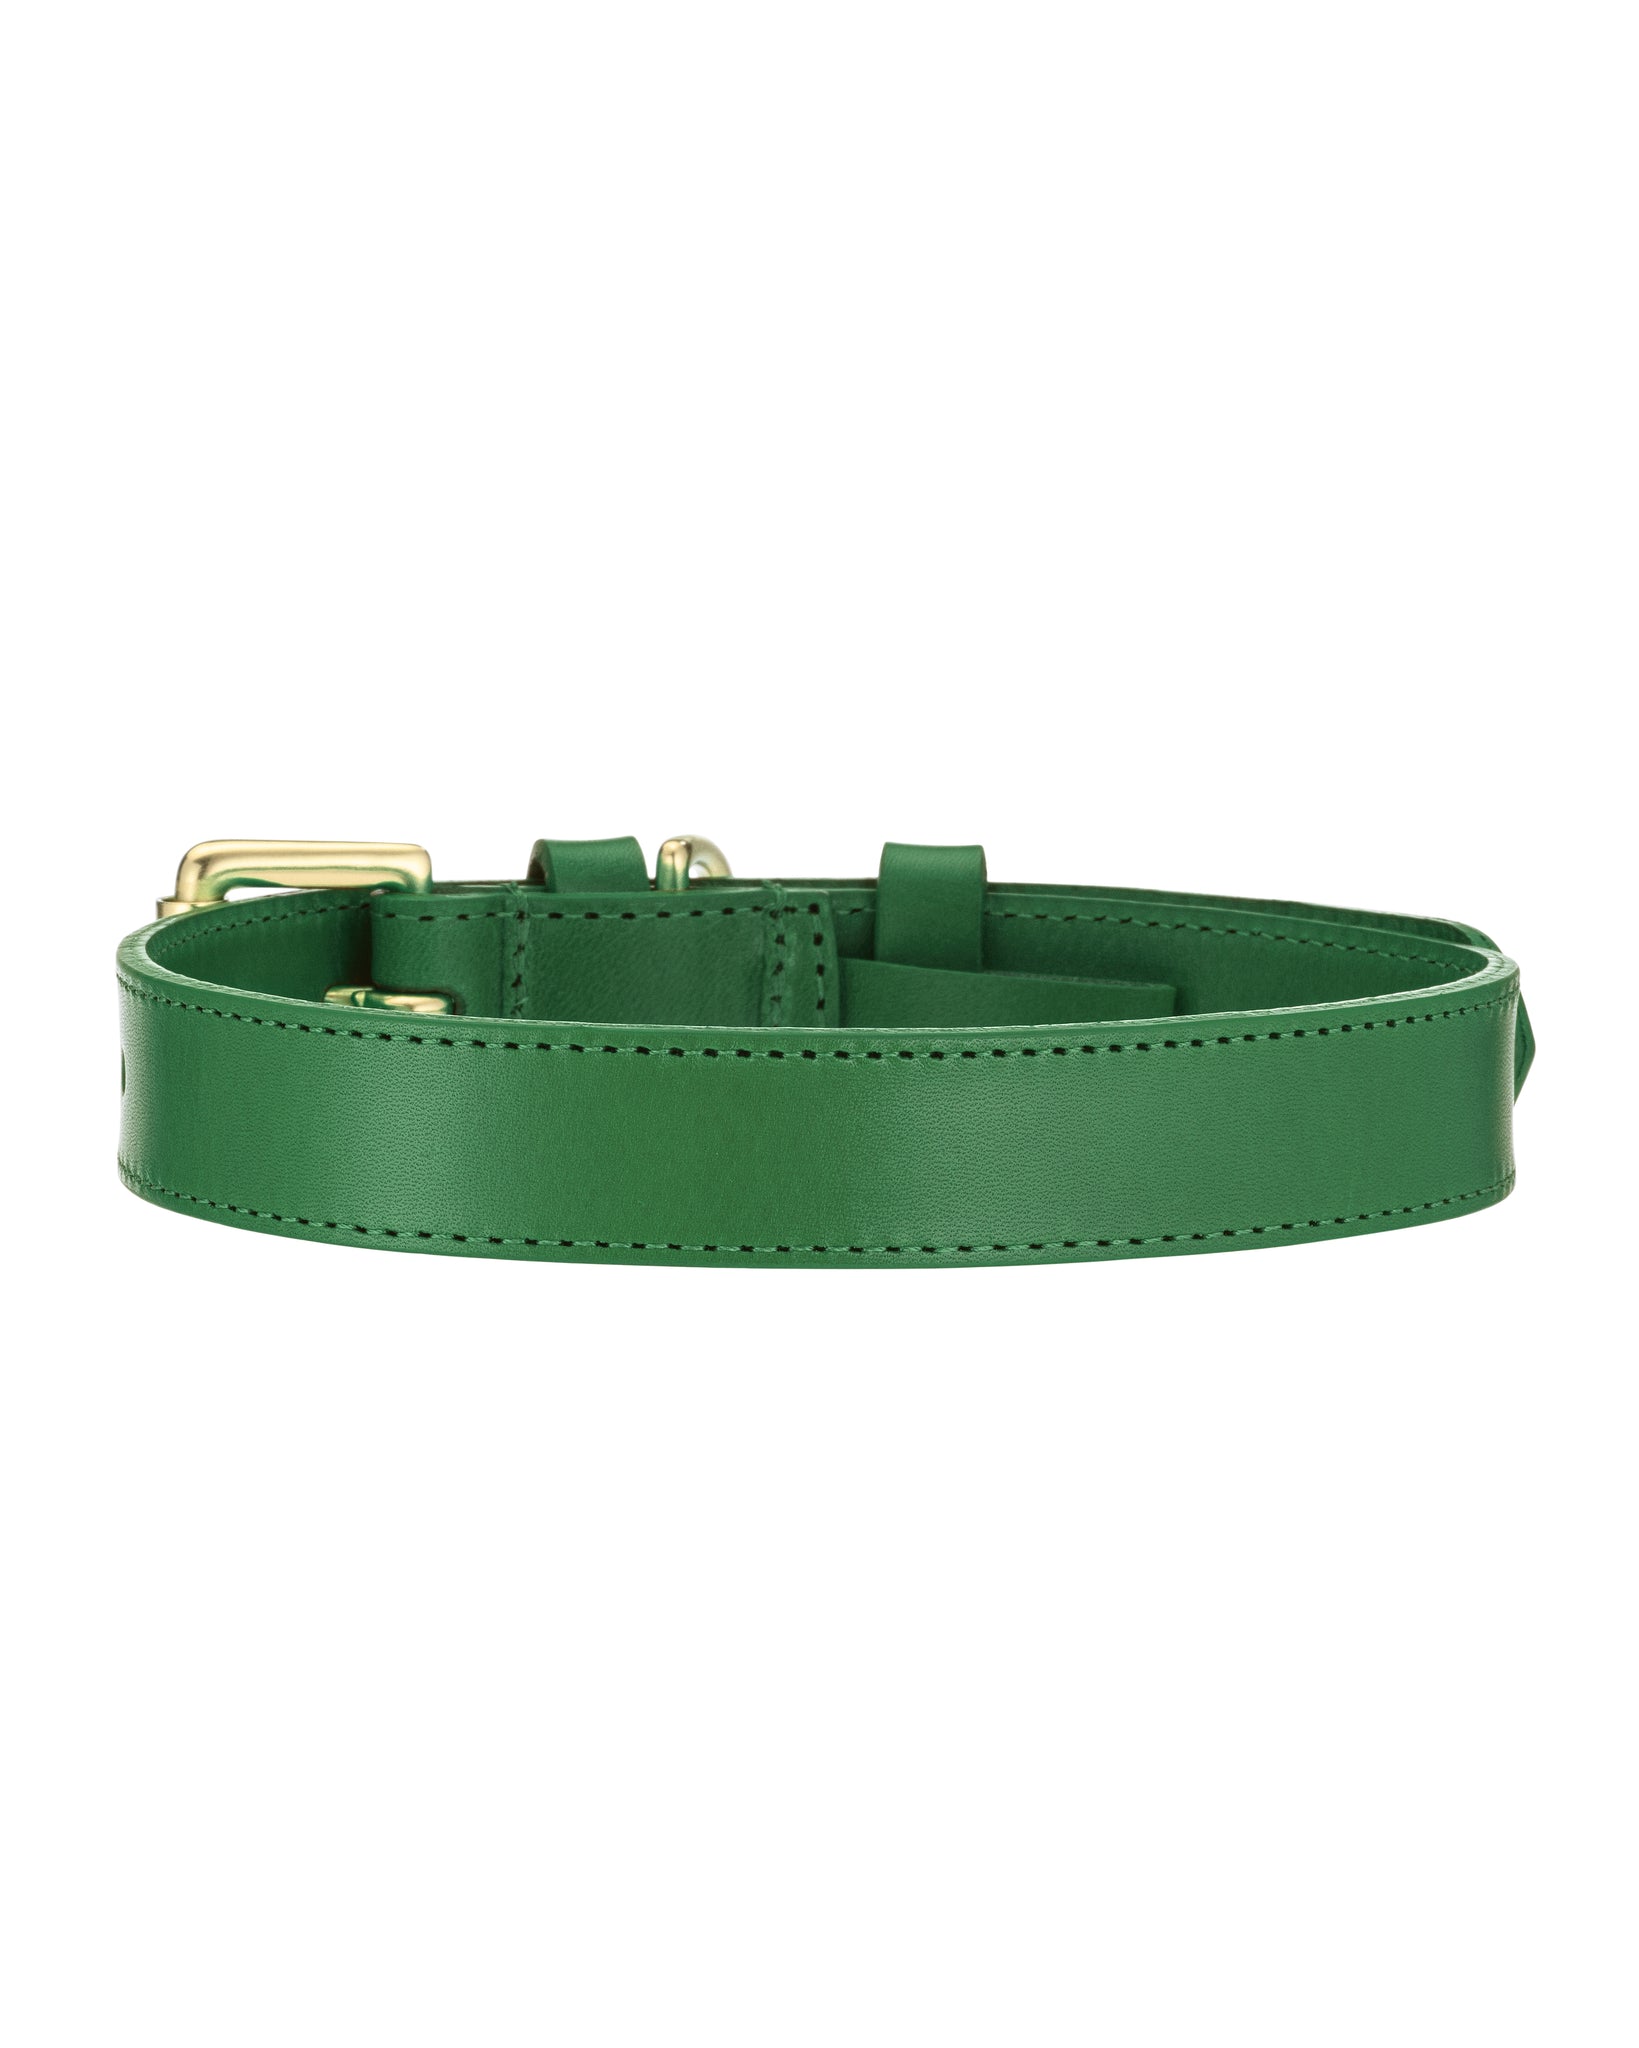 LISH Coopers Leather Collar Avocado Green